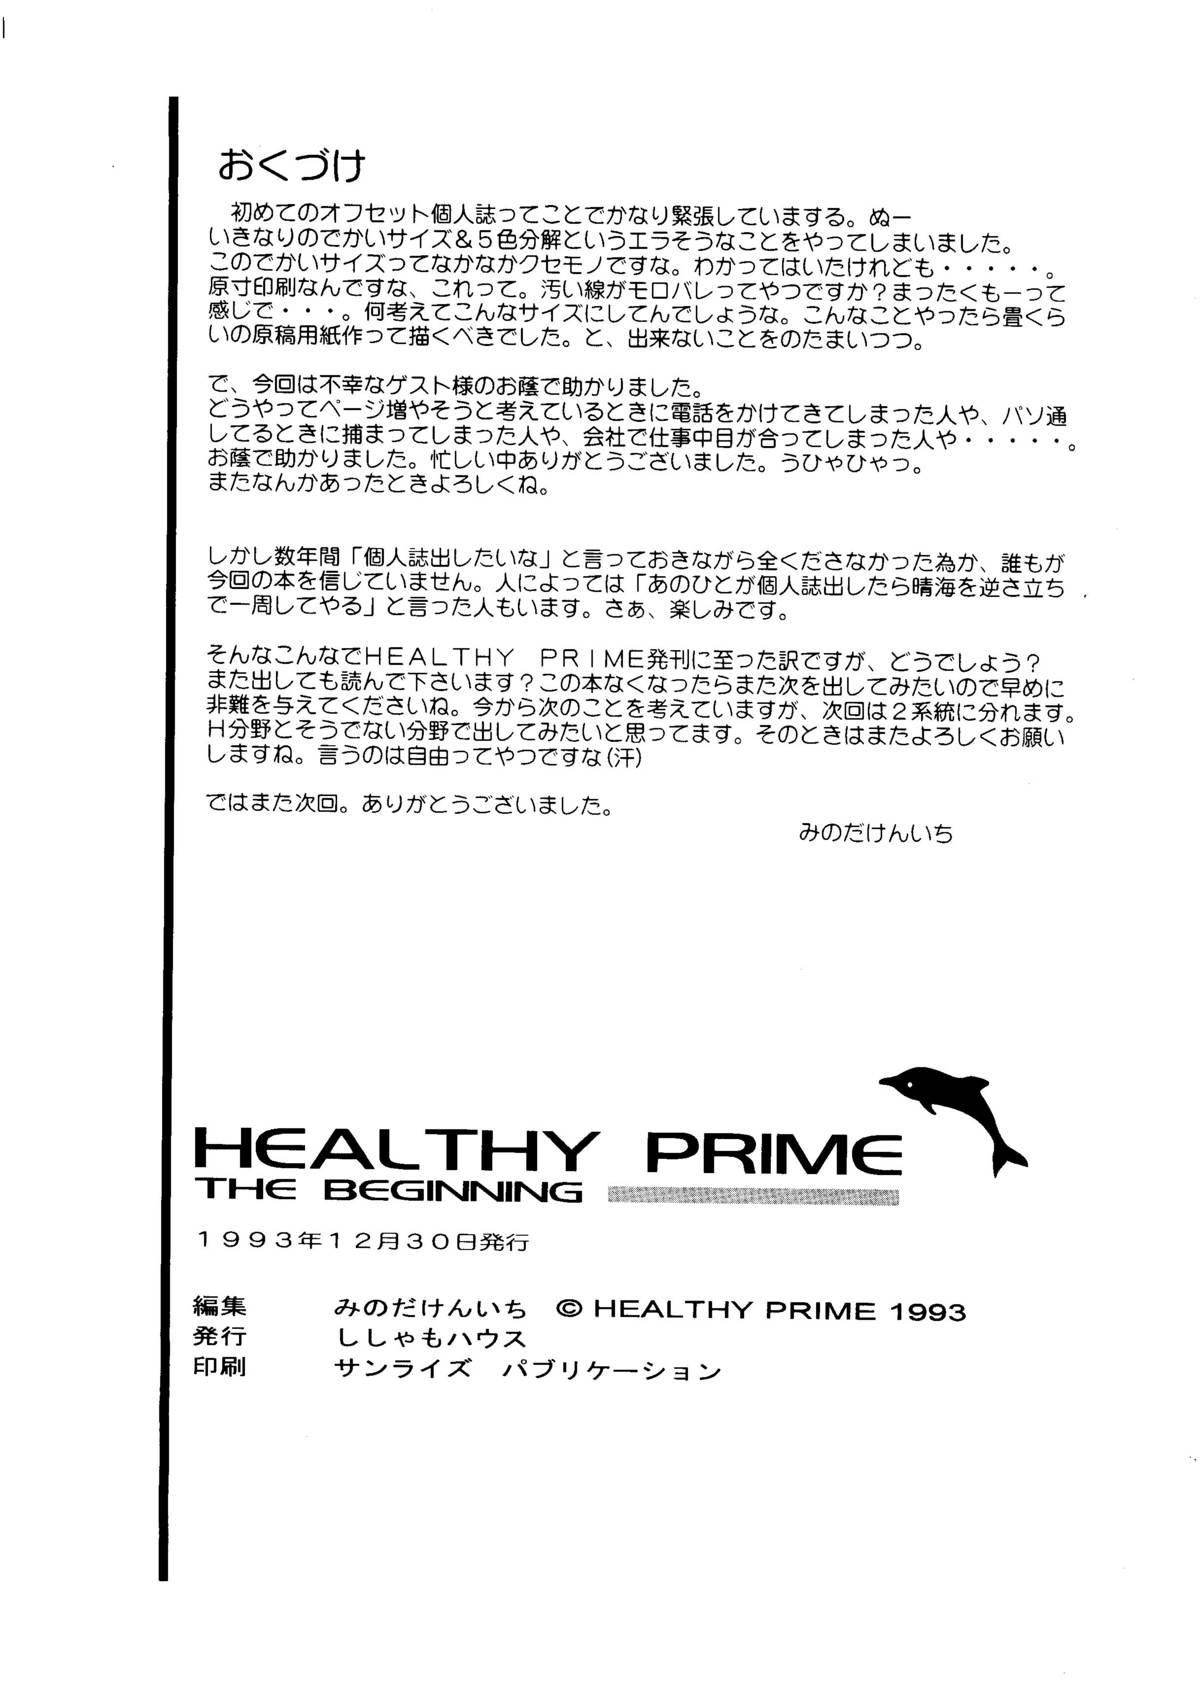 Healthy Prime The Beginning 28